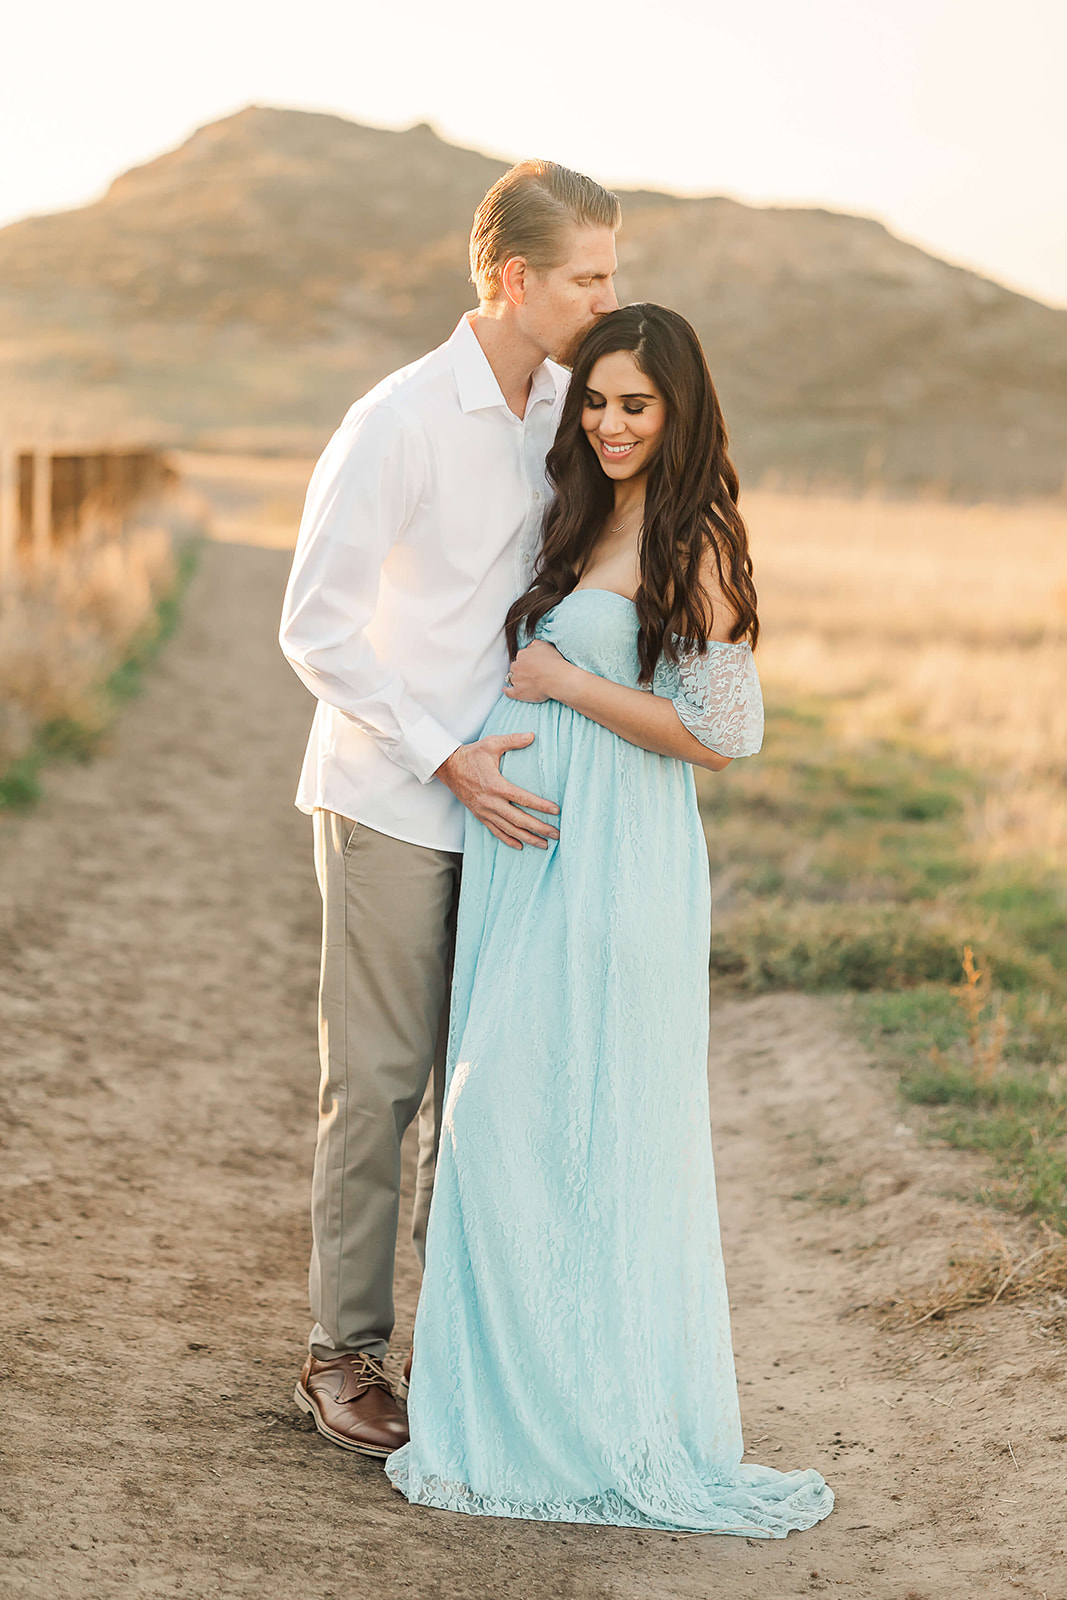 dad to be cradling his wife's baby bump Birthing centers in Orange County